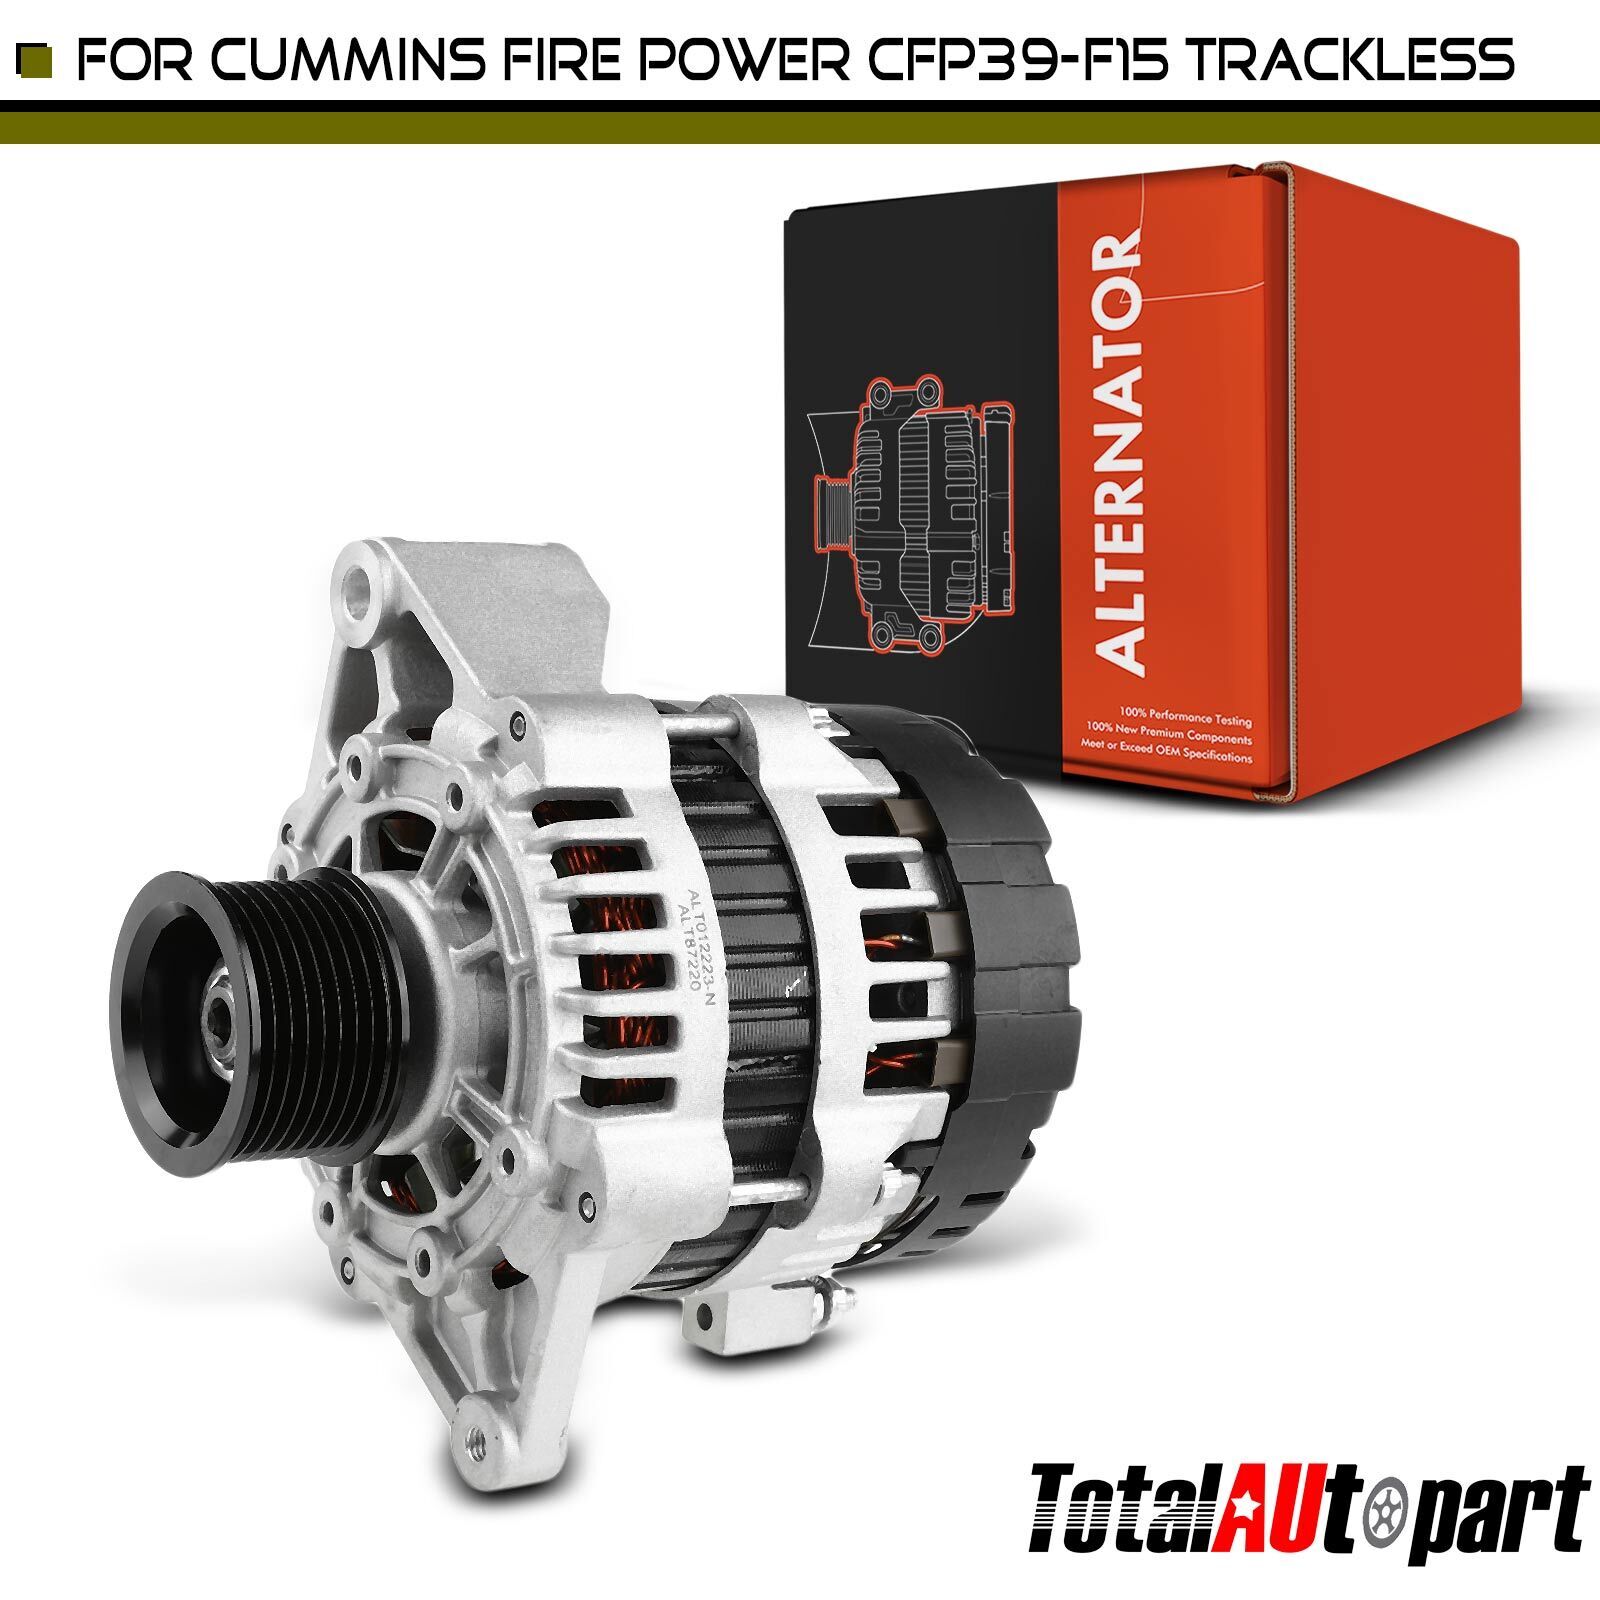 Alternator for Cummins Fire Power Trackless 2005-2010 95 Amp CW 8-Groove Pulley